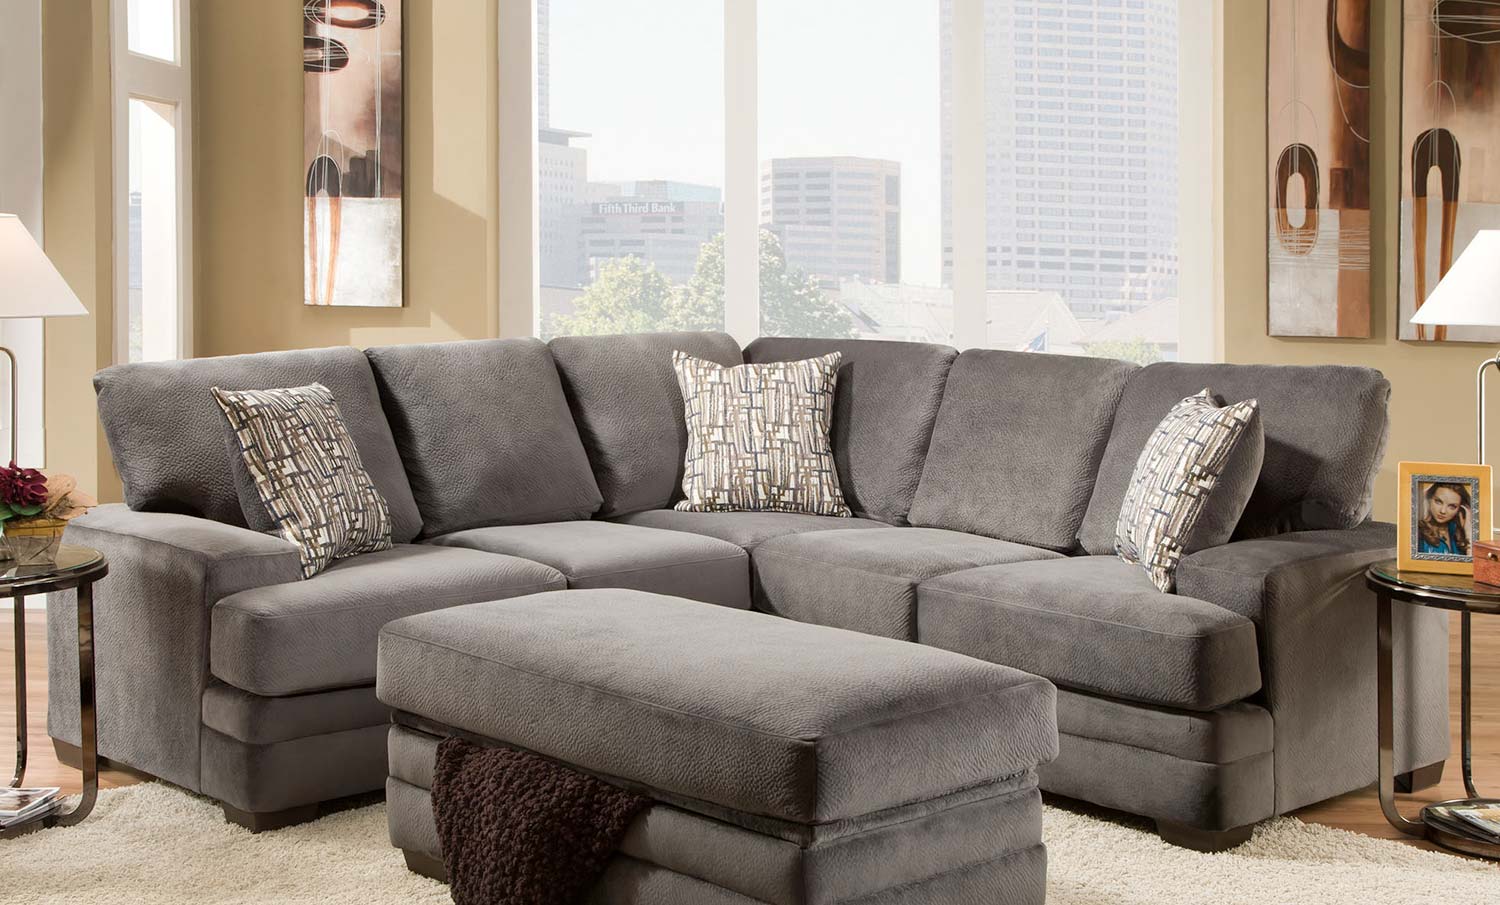 Chelsea Home Barstow Sectional Sofa Set